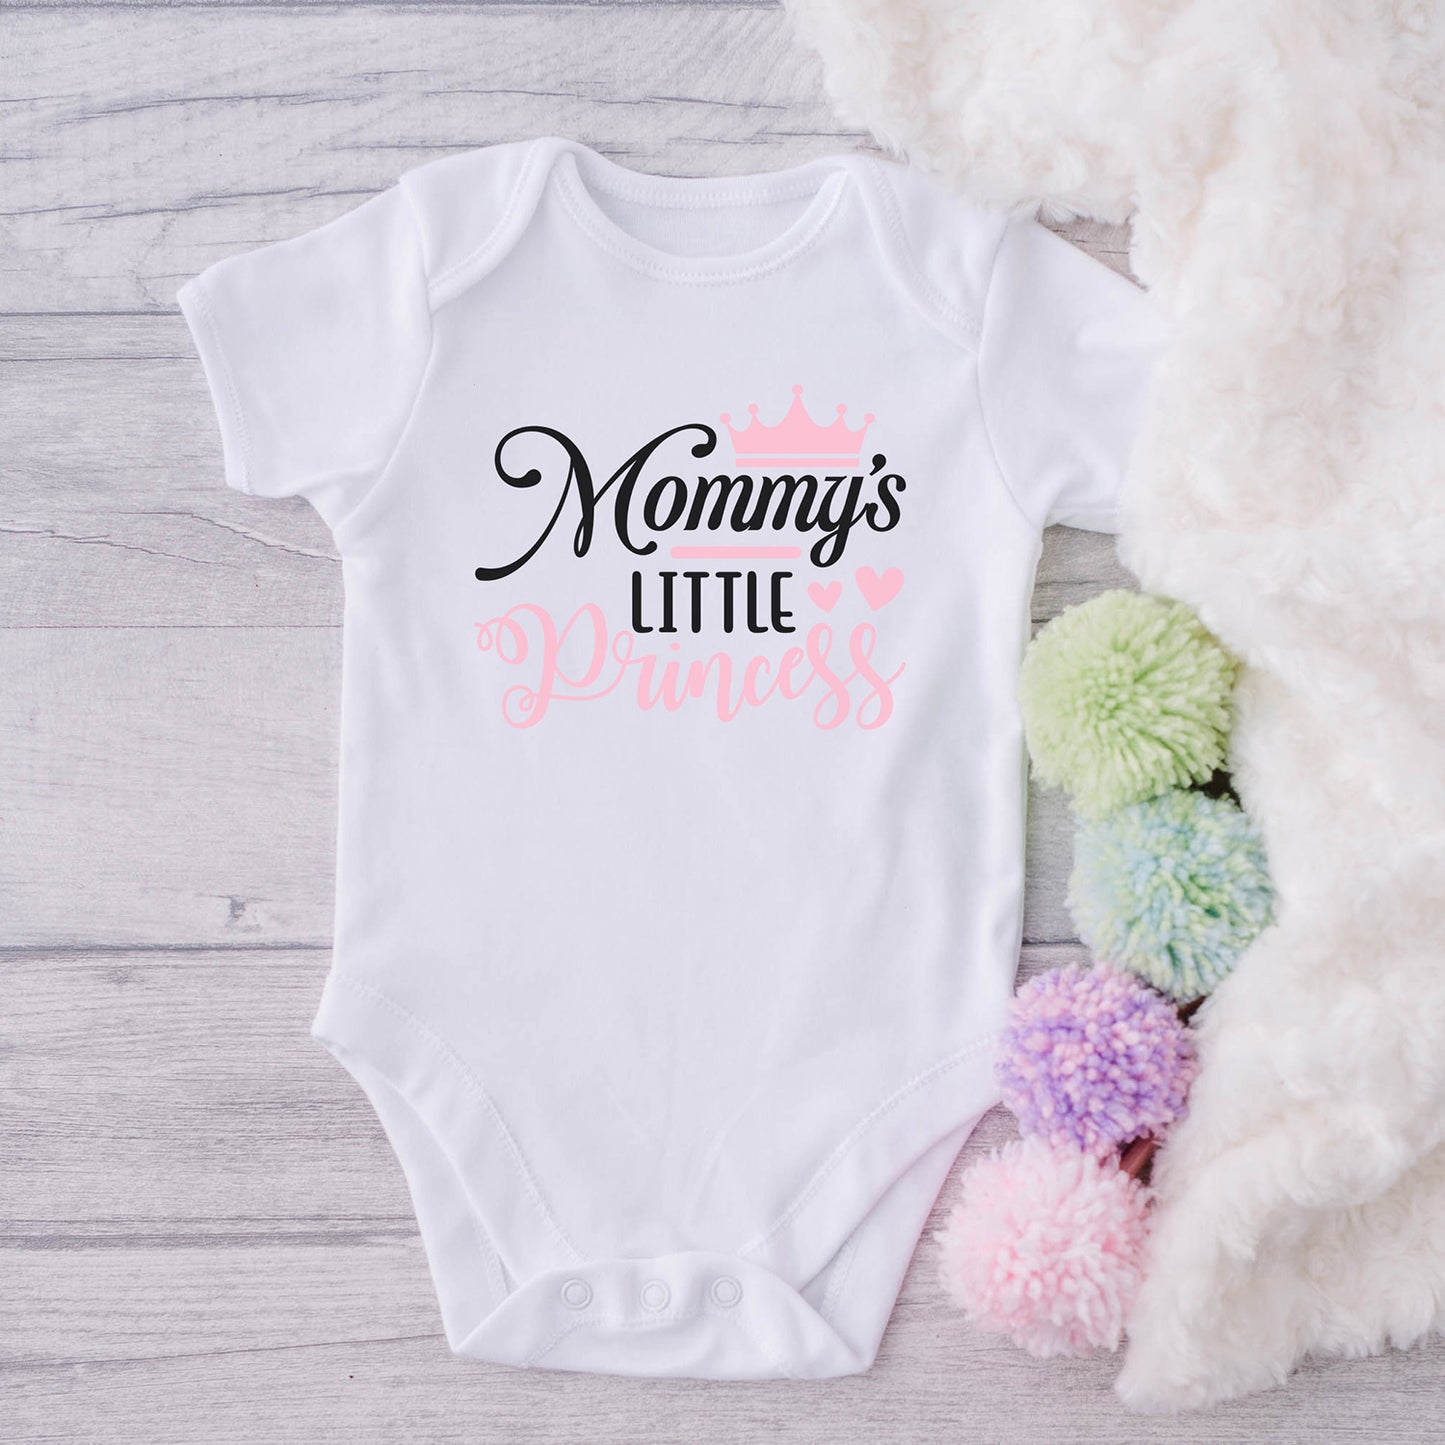 "Mommy's Little Princess" Graphic